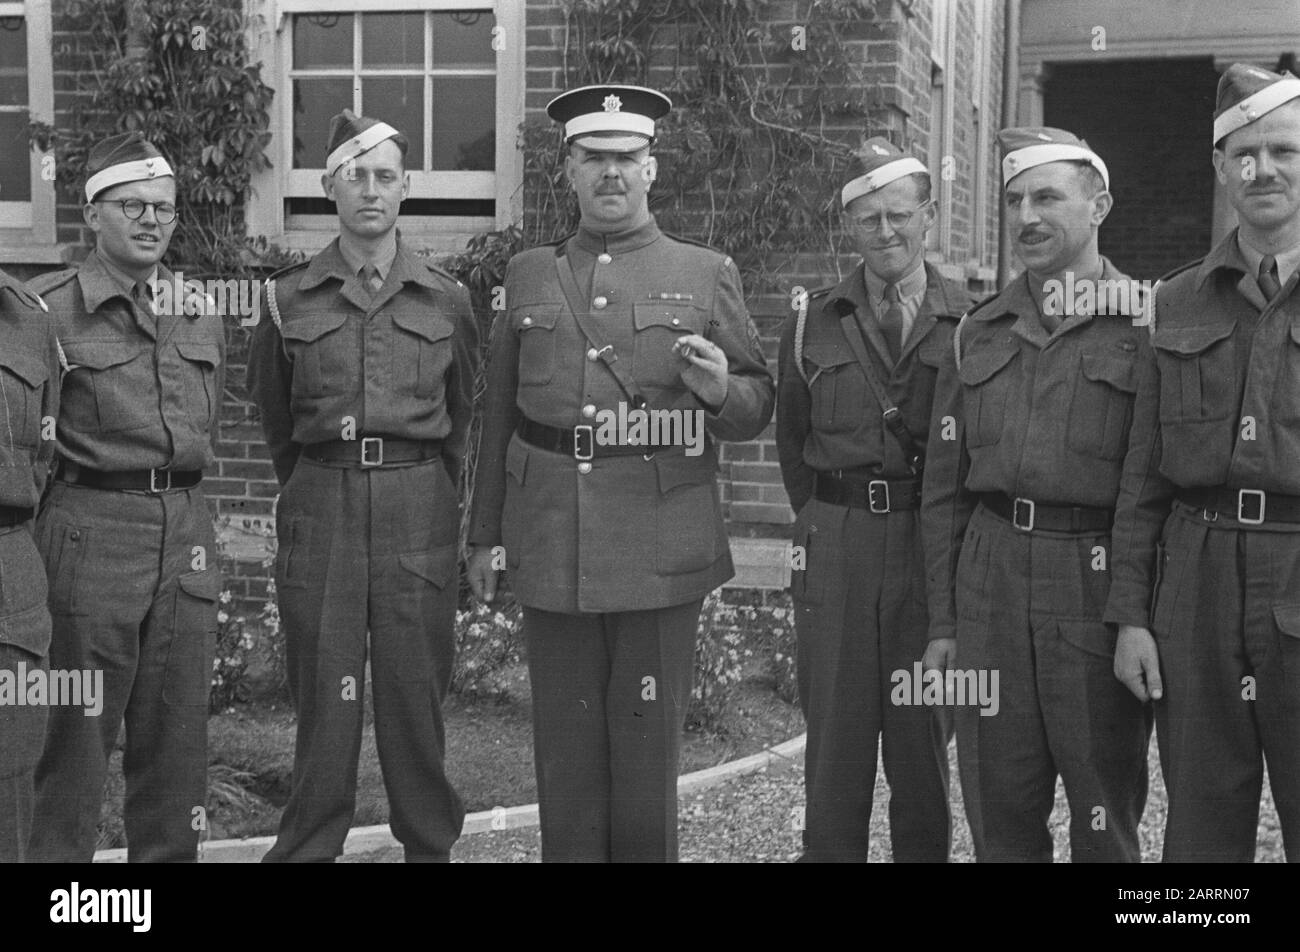 Series Octu-training at Aldershot for Dutch officers, together with British cadets. [Passing out of Dutch Cadets. 15 Group cadets] Date: May 1943 Location: Aldershot, Great Britain Keywords: army, soldiers, trainings, World War II Stock Photo